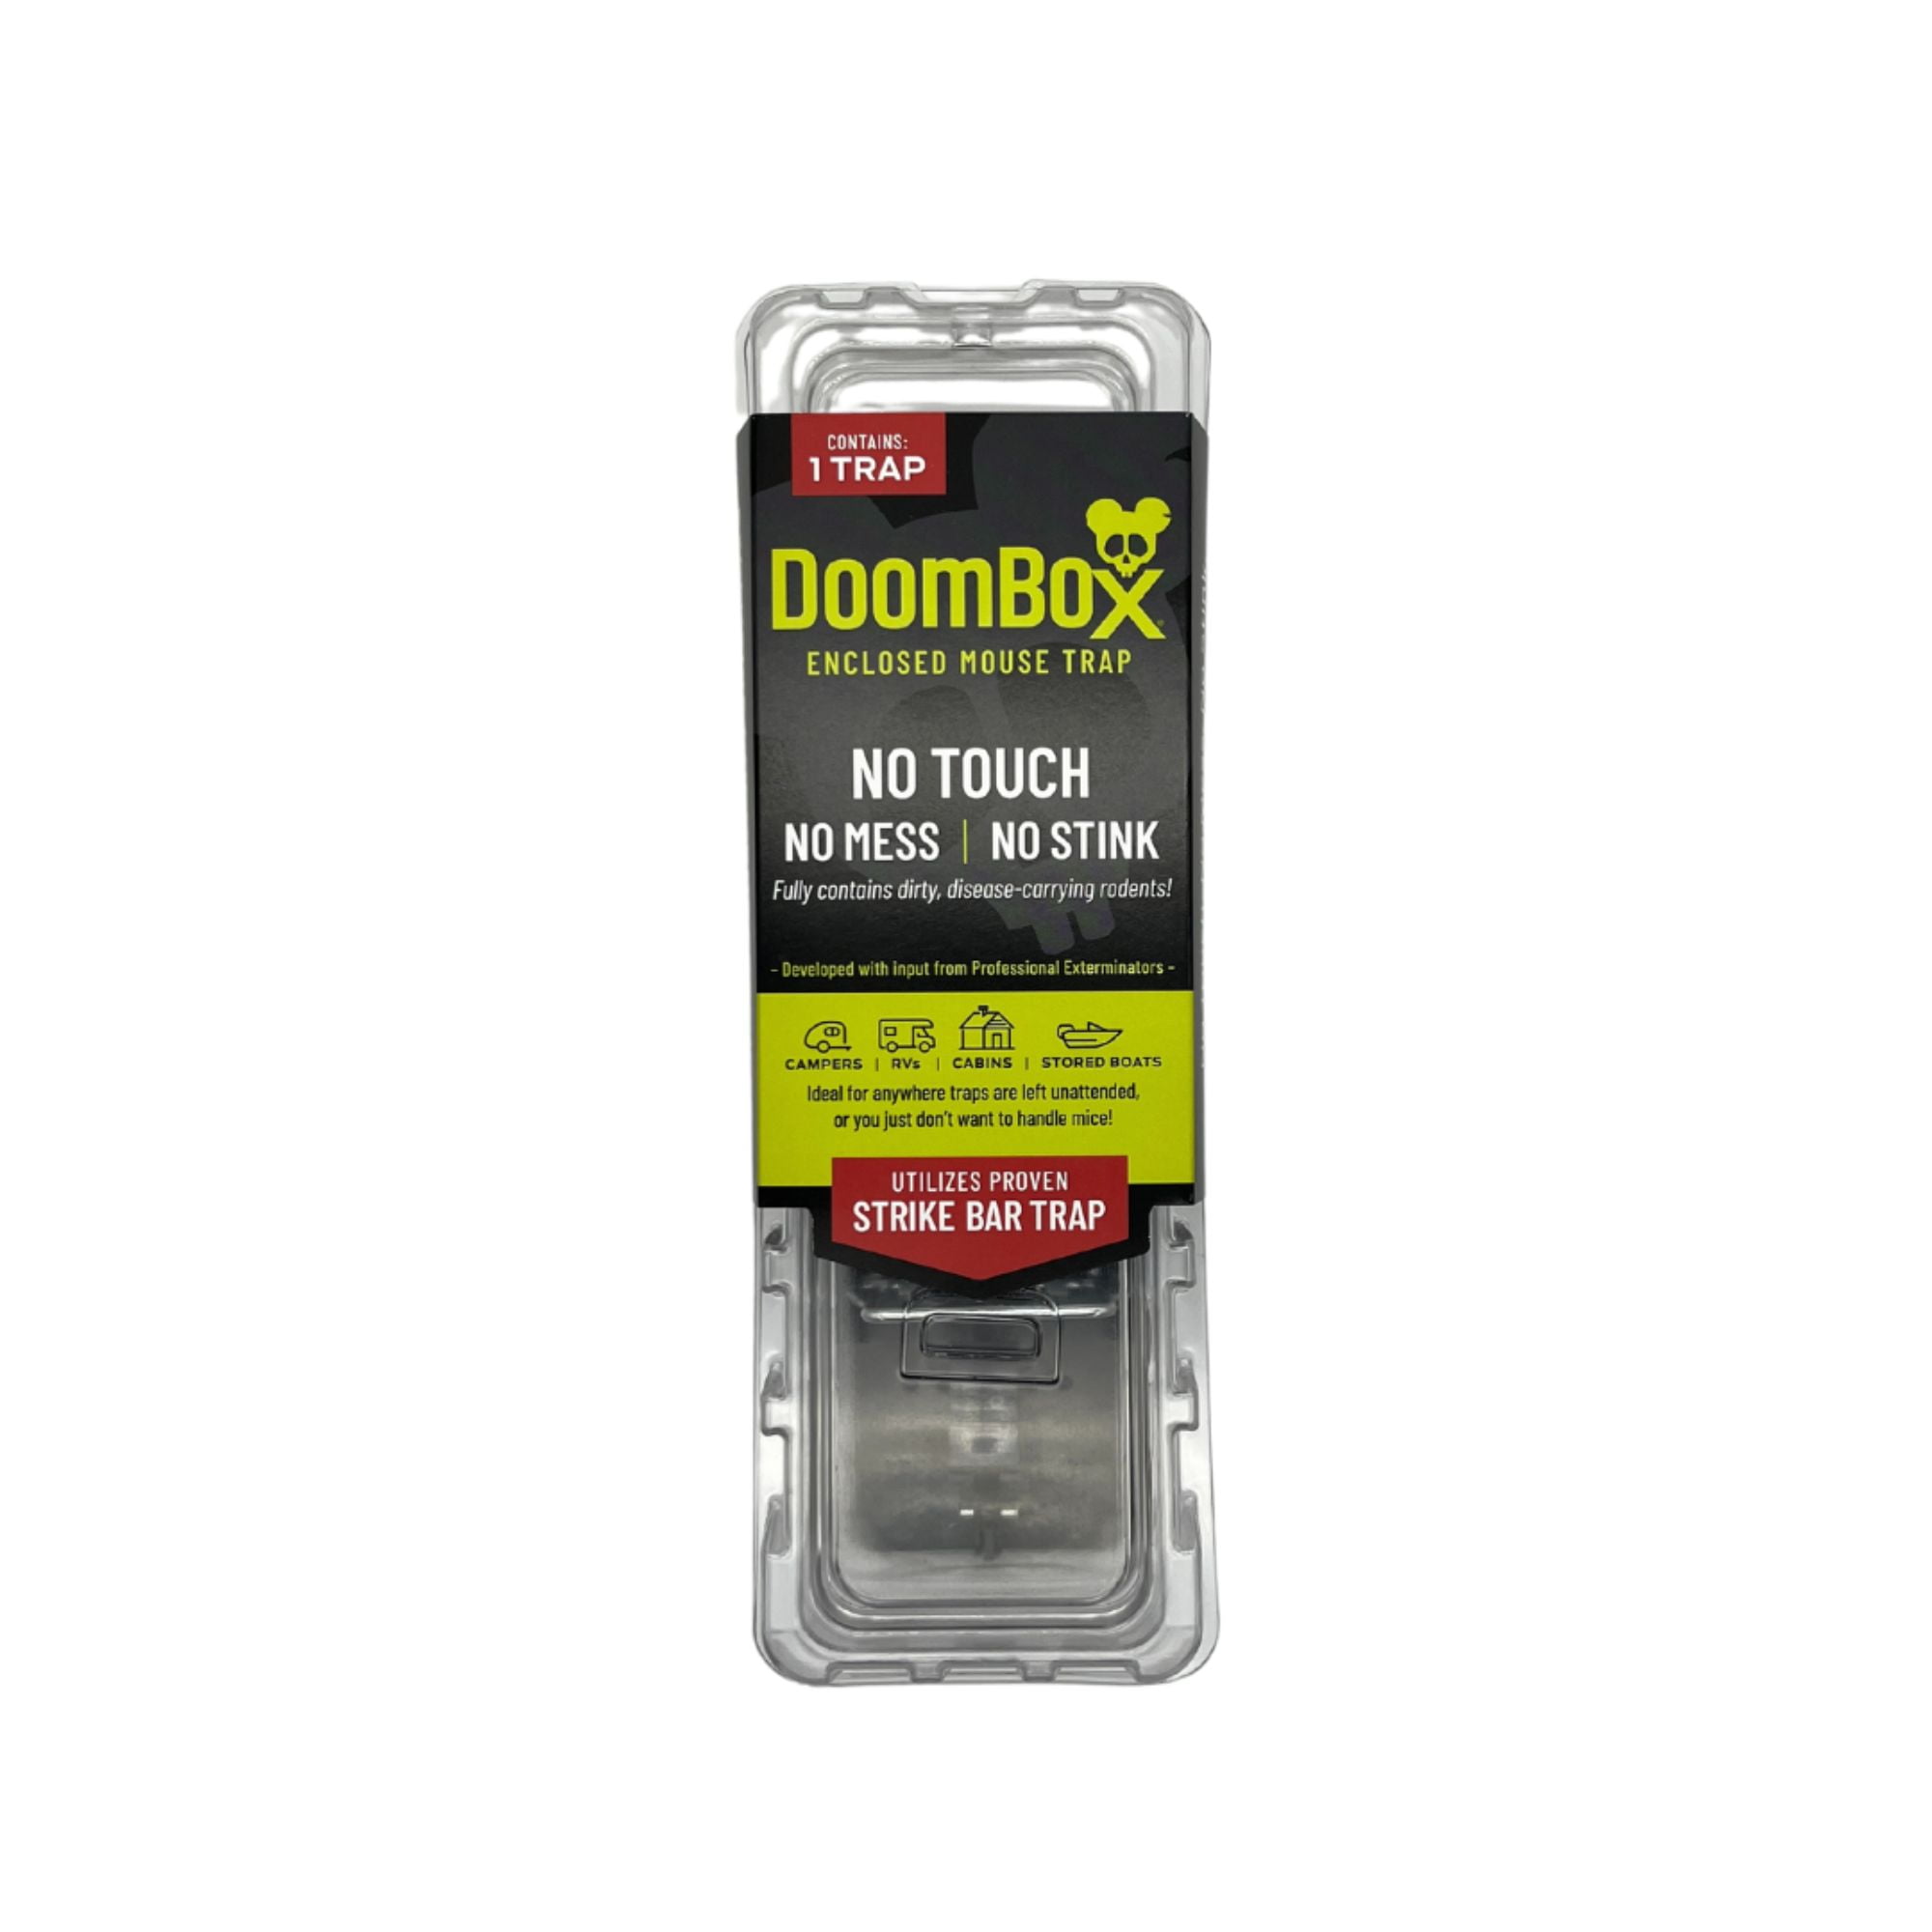 Doombox Traps – The Enclosed Mouse Trap